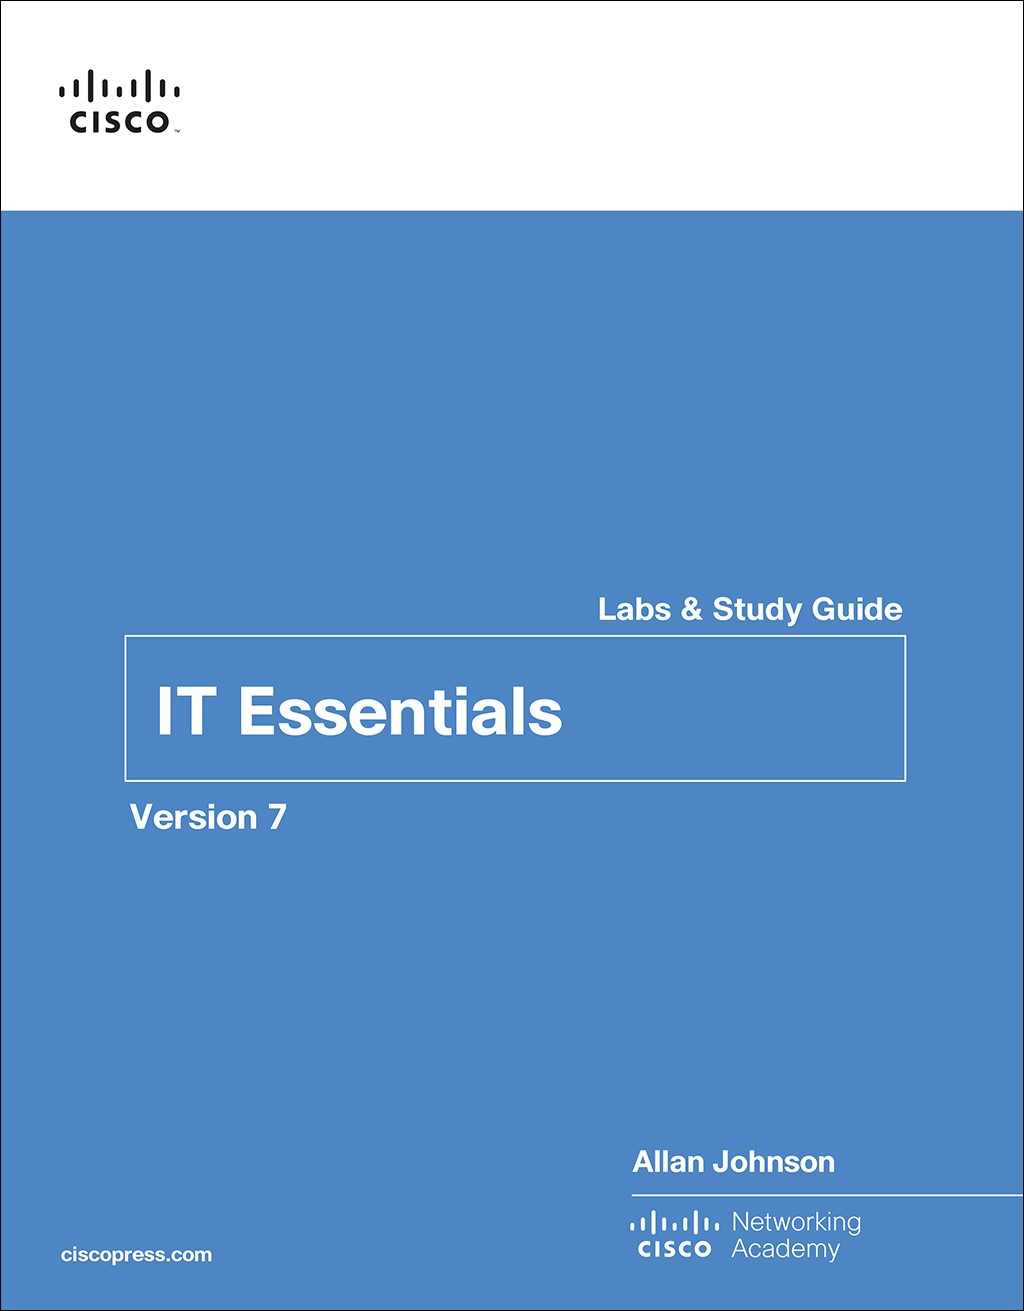 IT Essentials Labs and Study Guide Version 7 | Pearson IT Certification